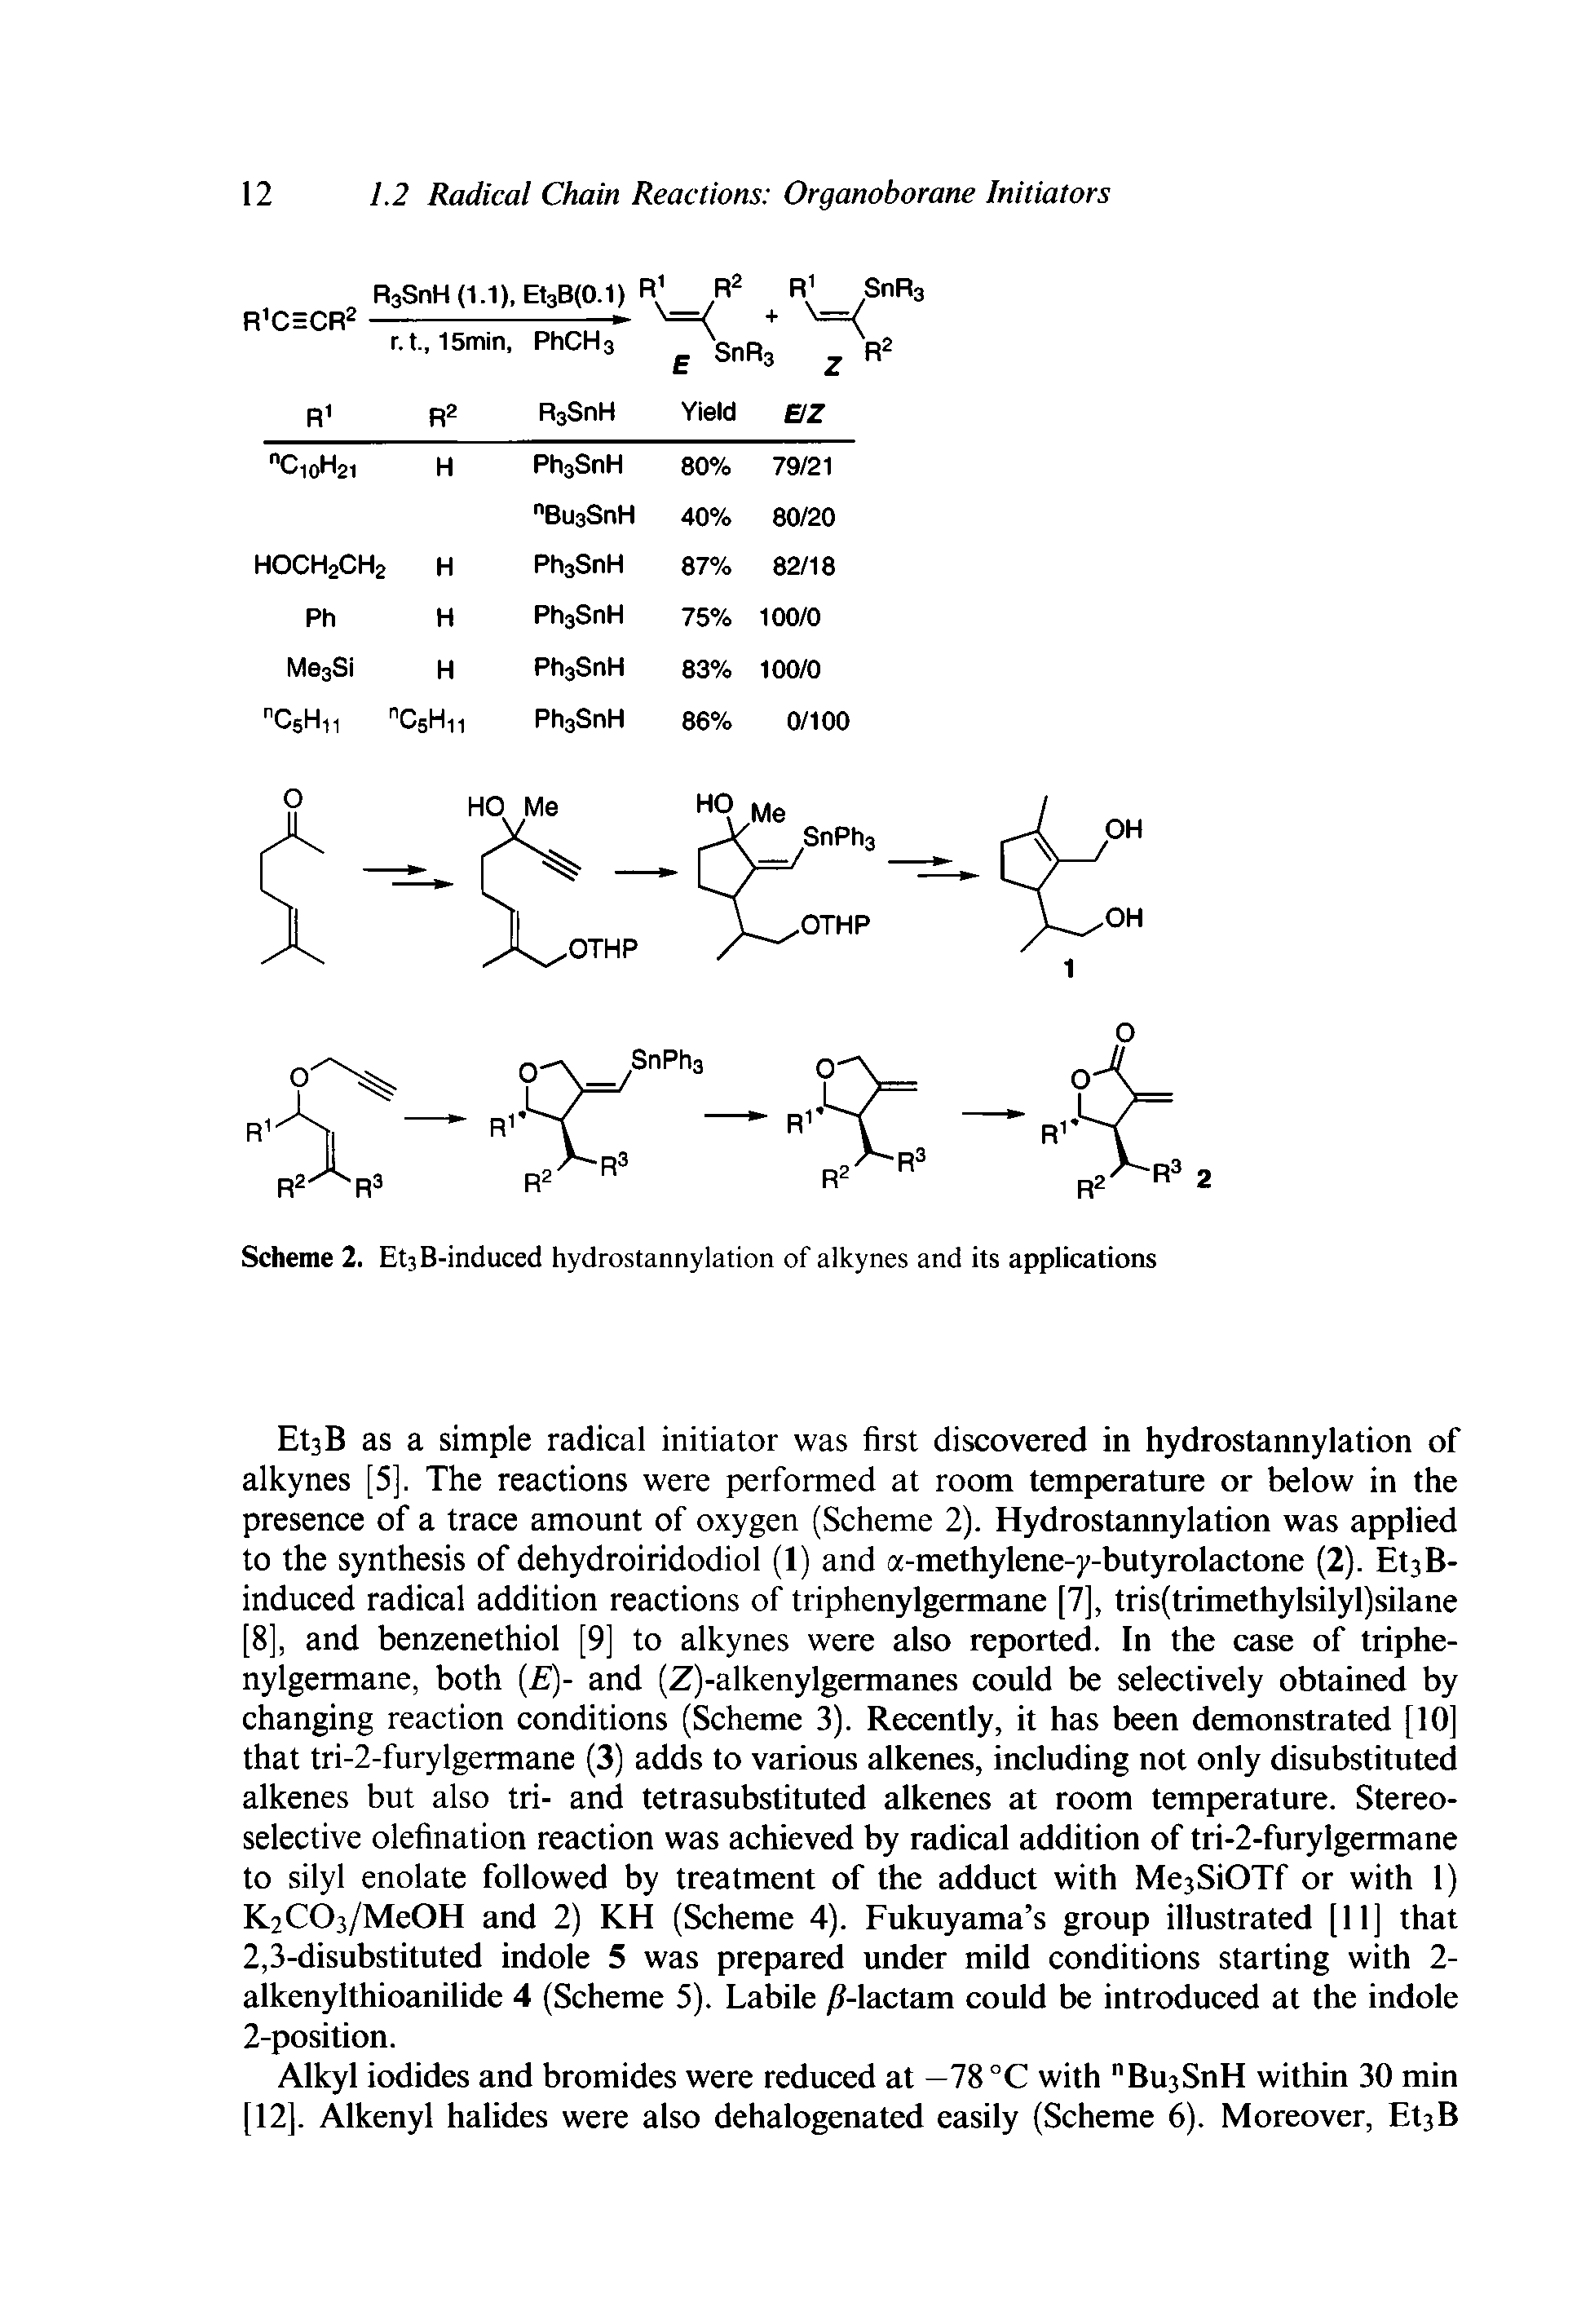 Scheme 2. EtjB-induced hydrostannylation of alkynes and its applications...